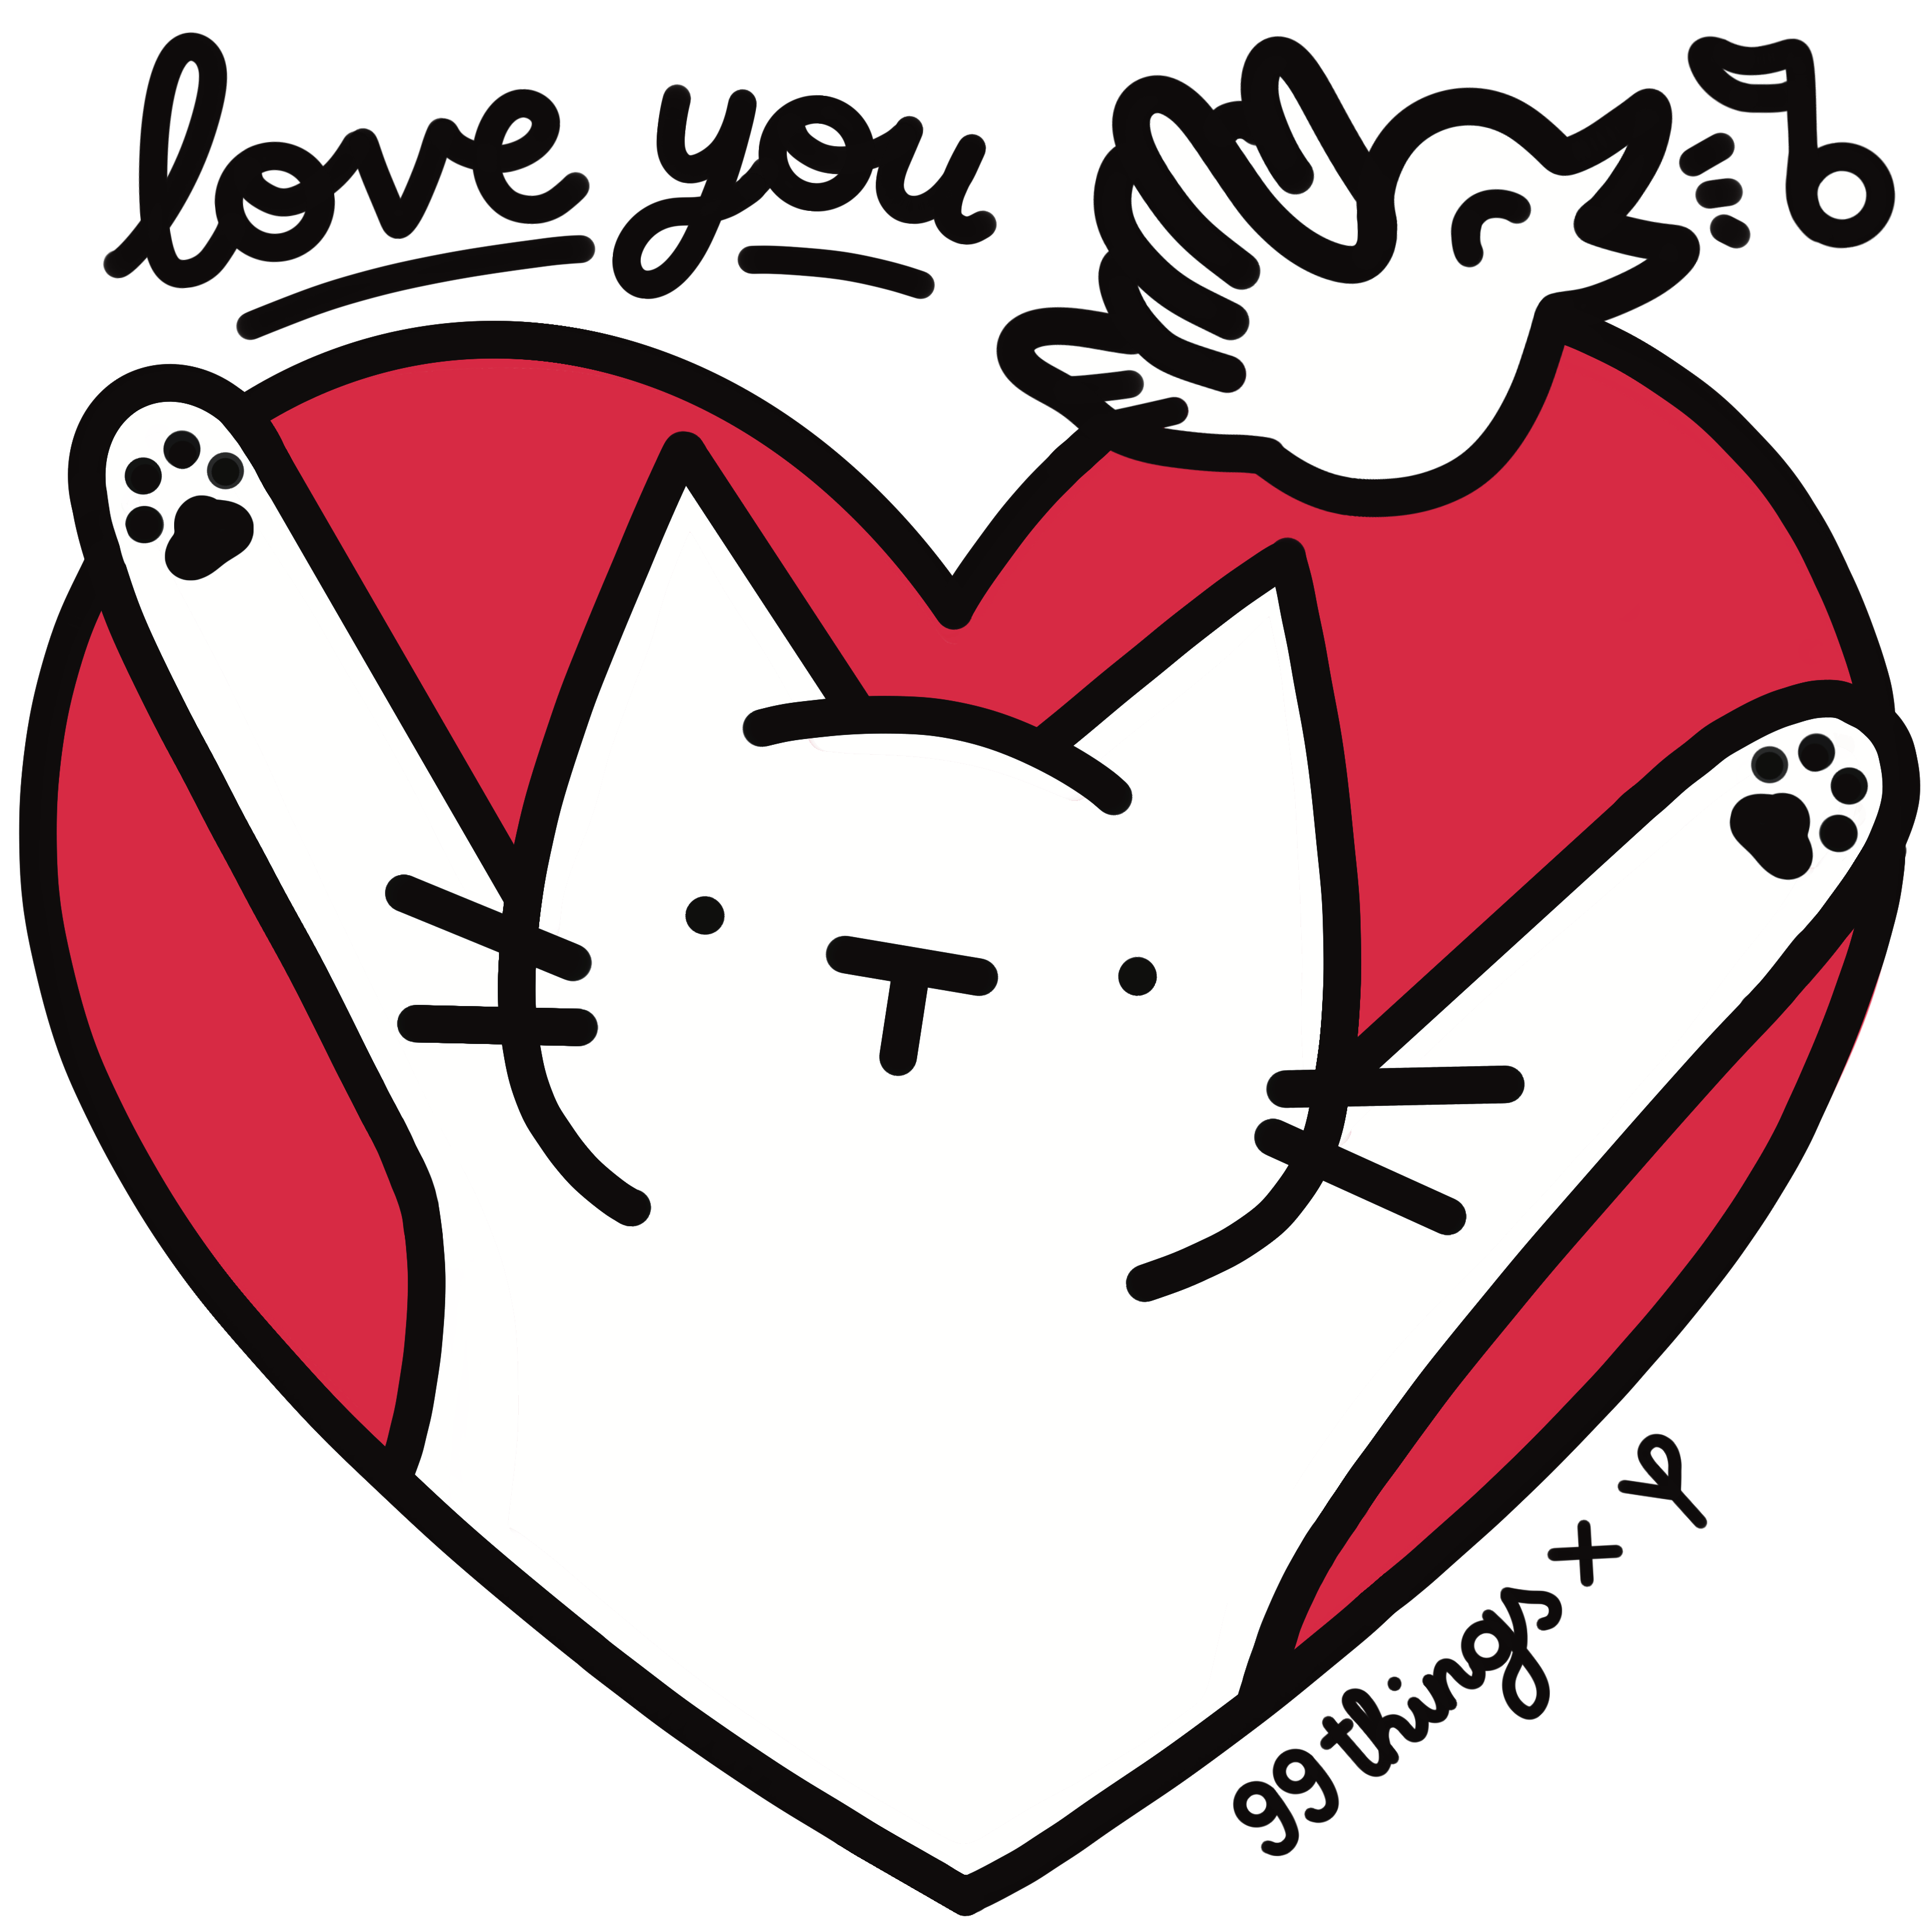 a white cat and a bird inside a red heart saying I love you, unique design created by Vfelder for 99things